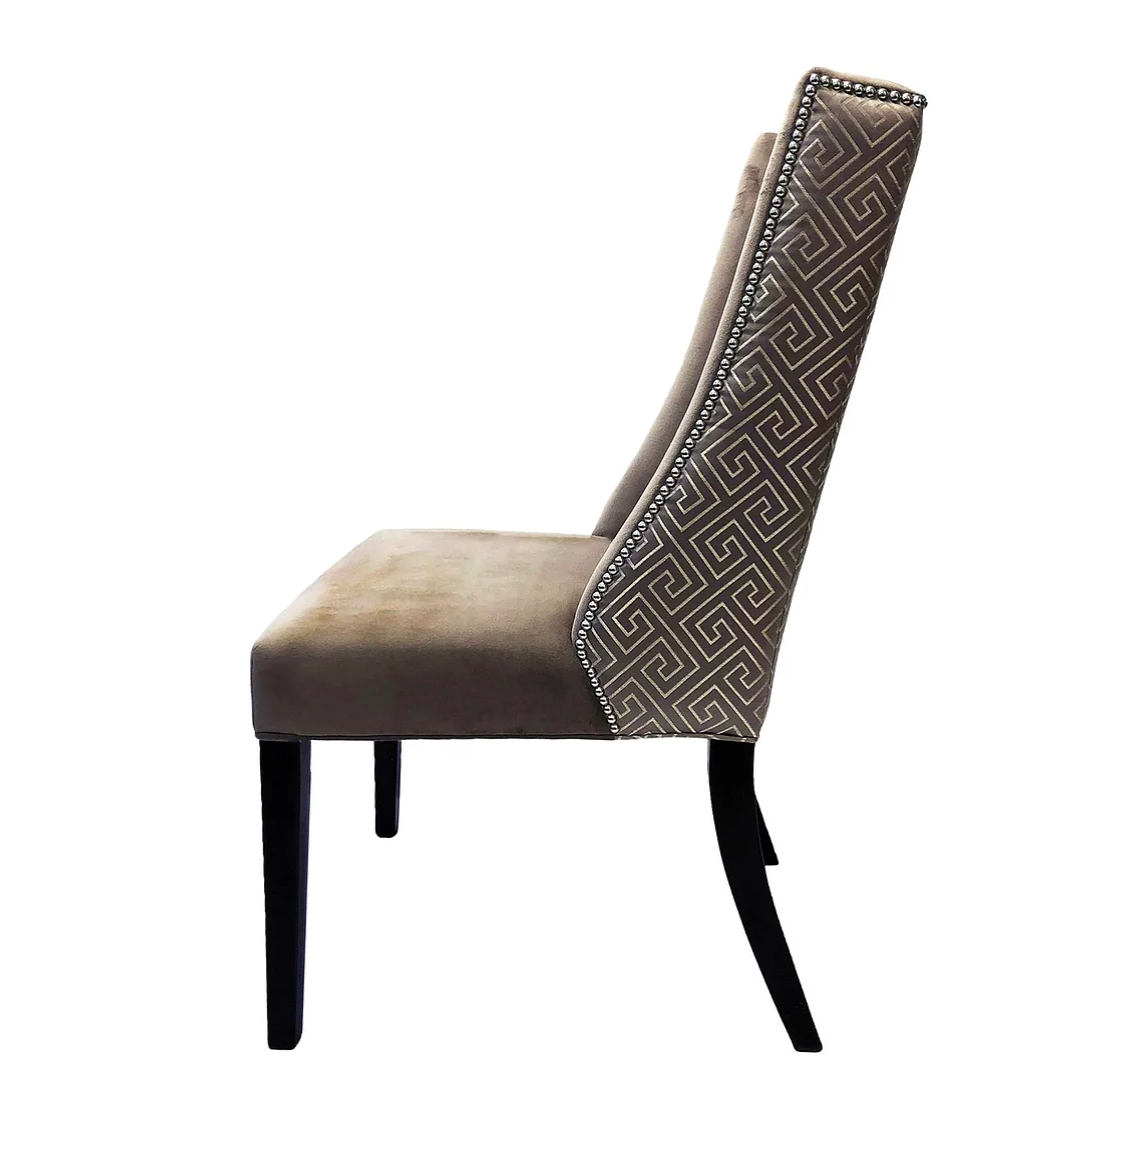 Ambrose Dining Chair - Canadian Furniture